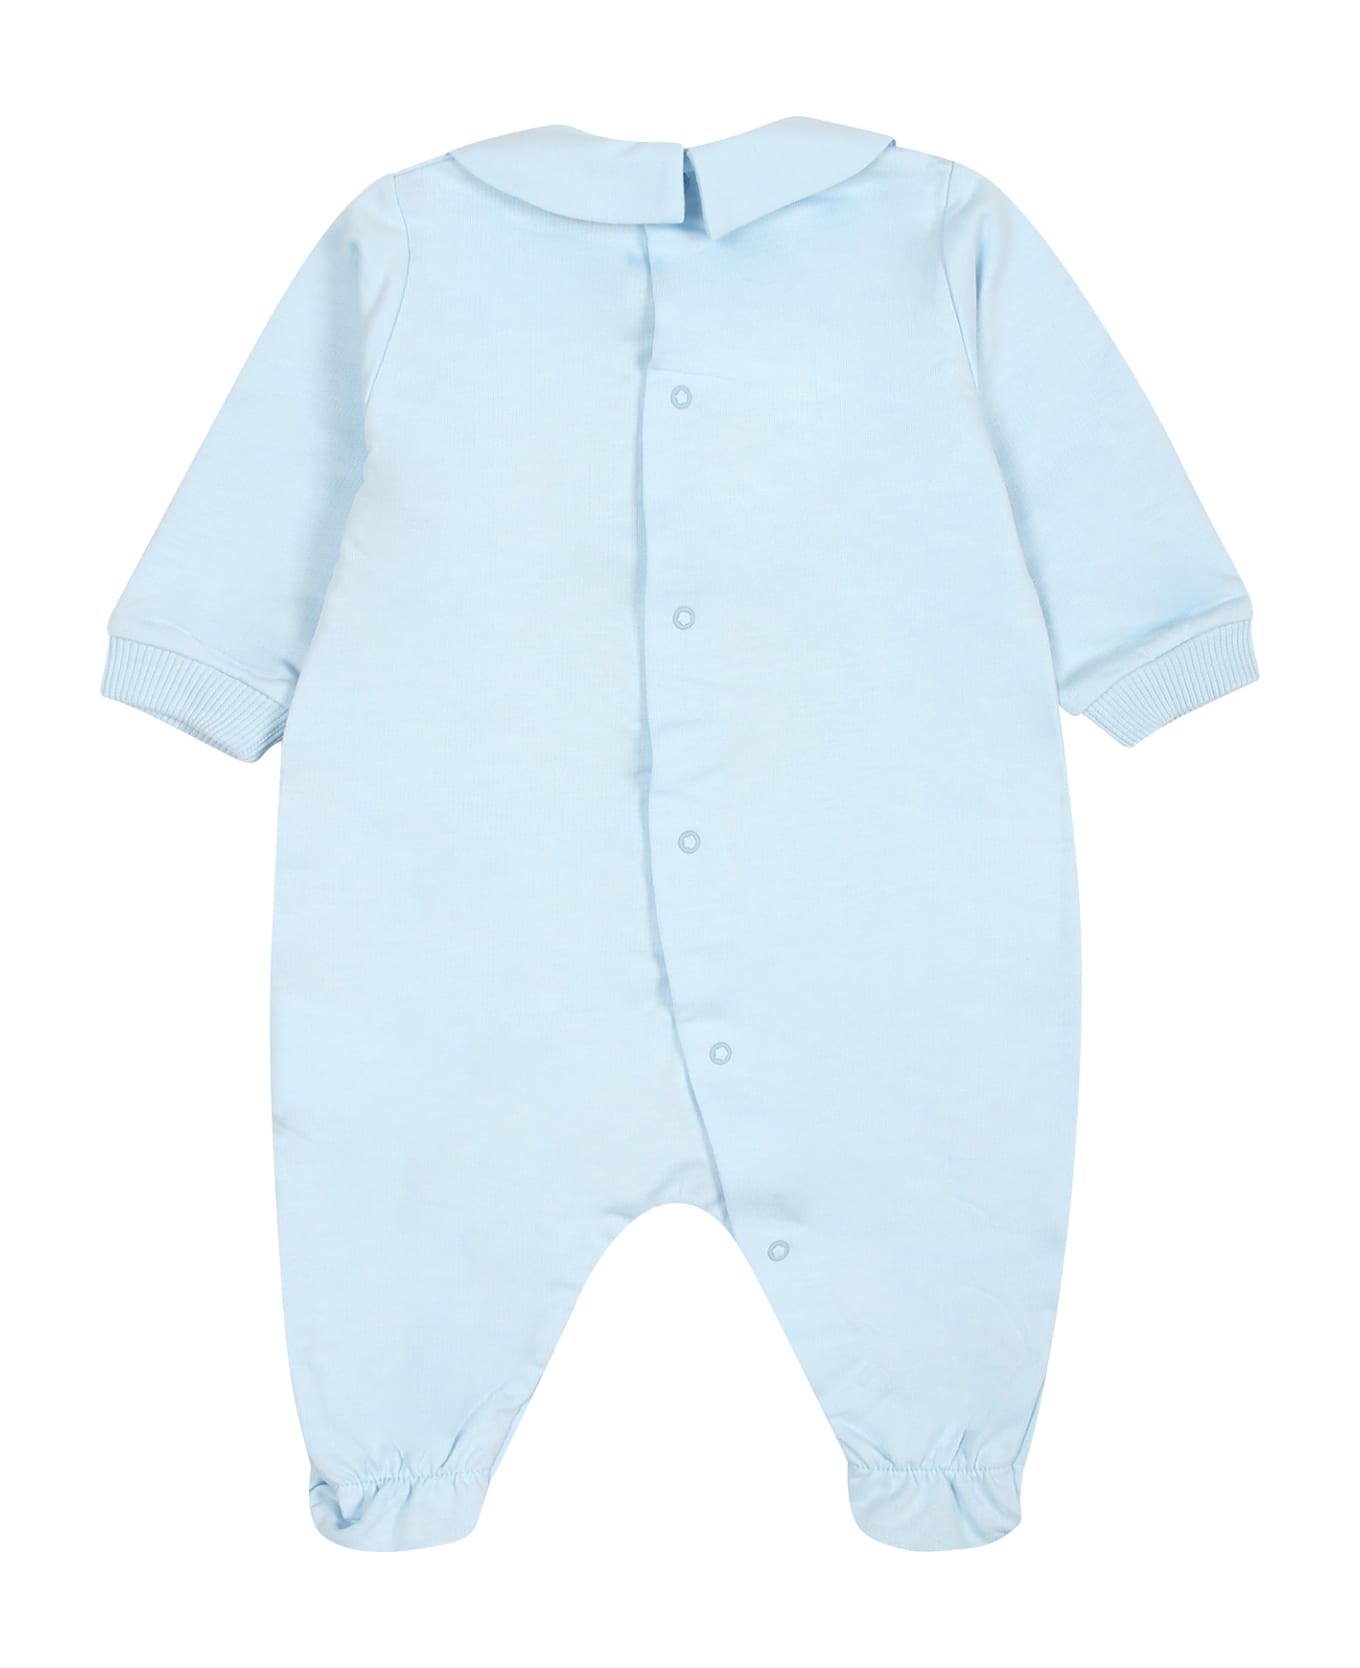 Moschino Light Blue Babygrow For Baby Boy With Teddy Bear - Light Blue ボディスーツ＆セットアップ